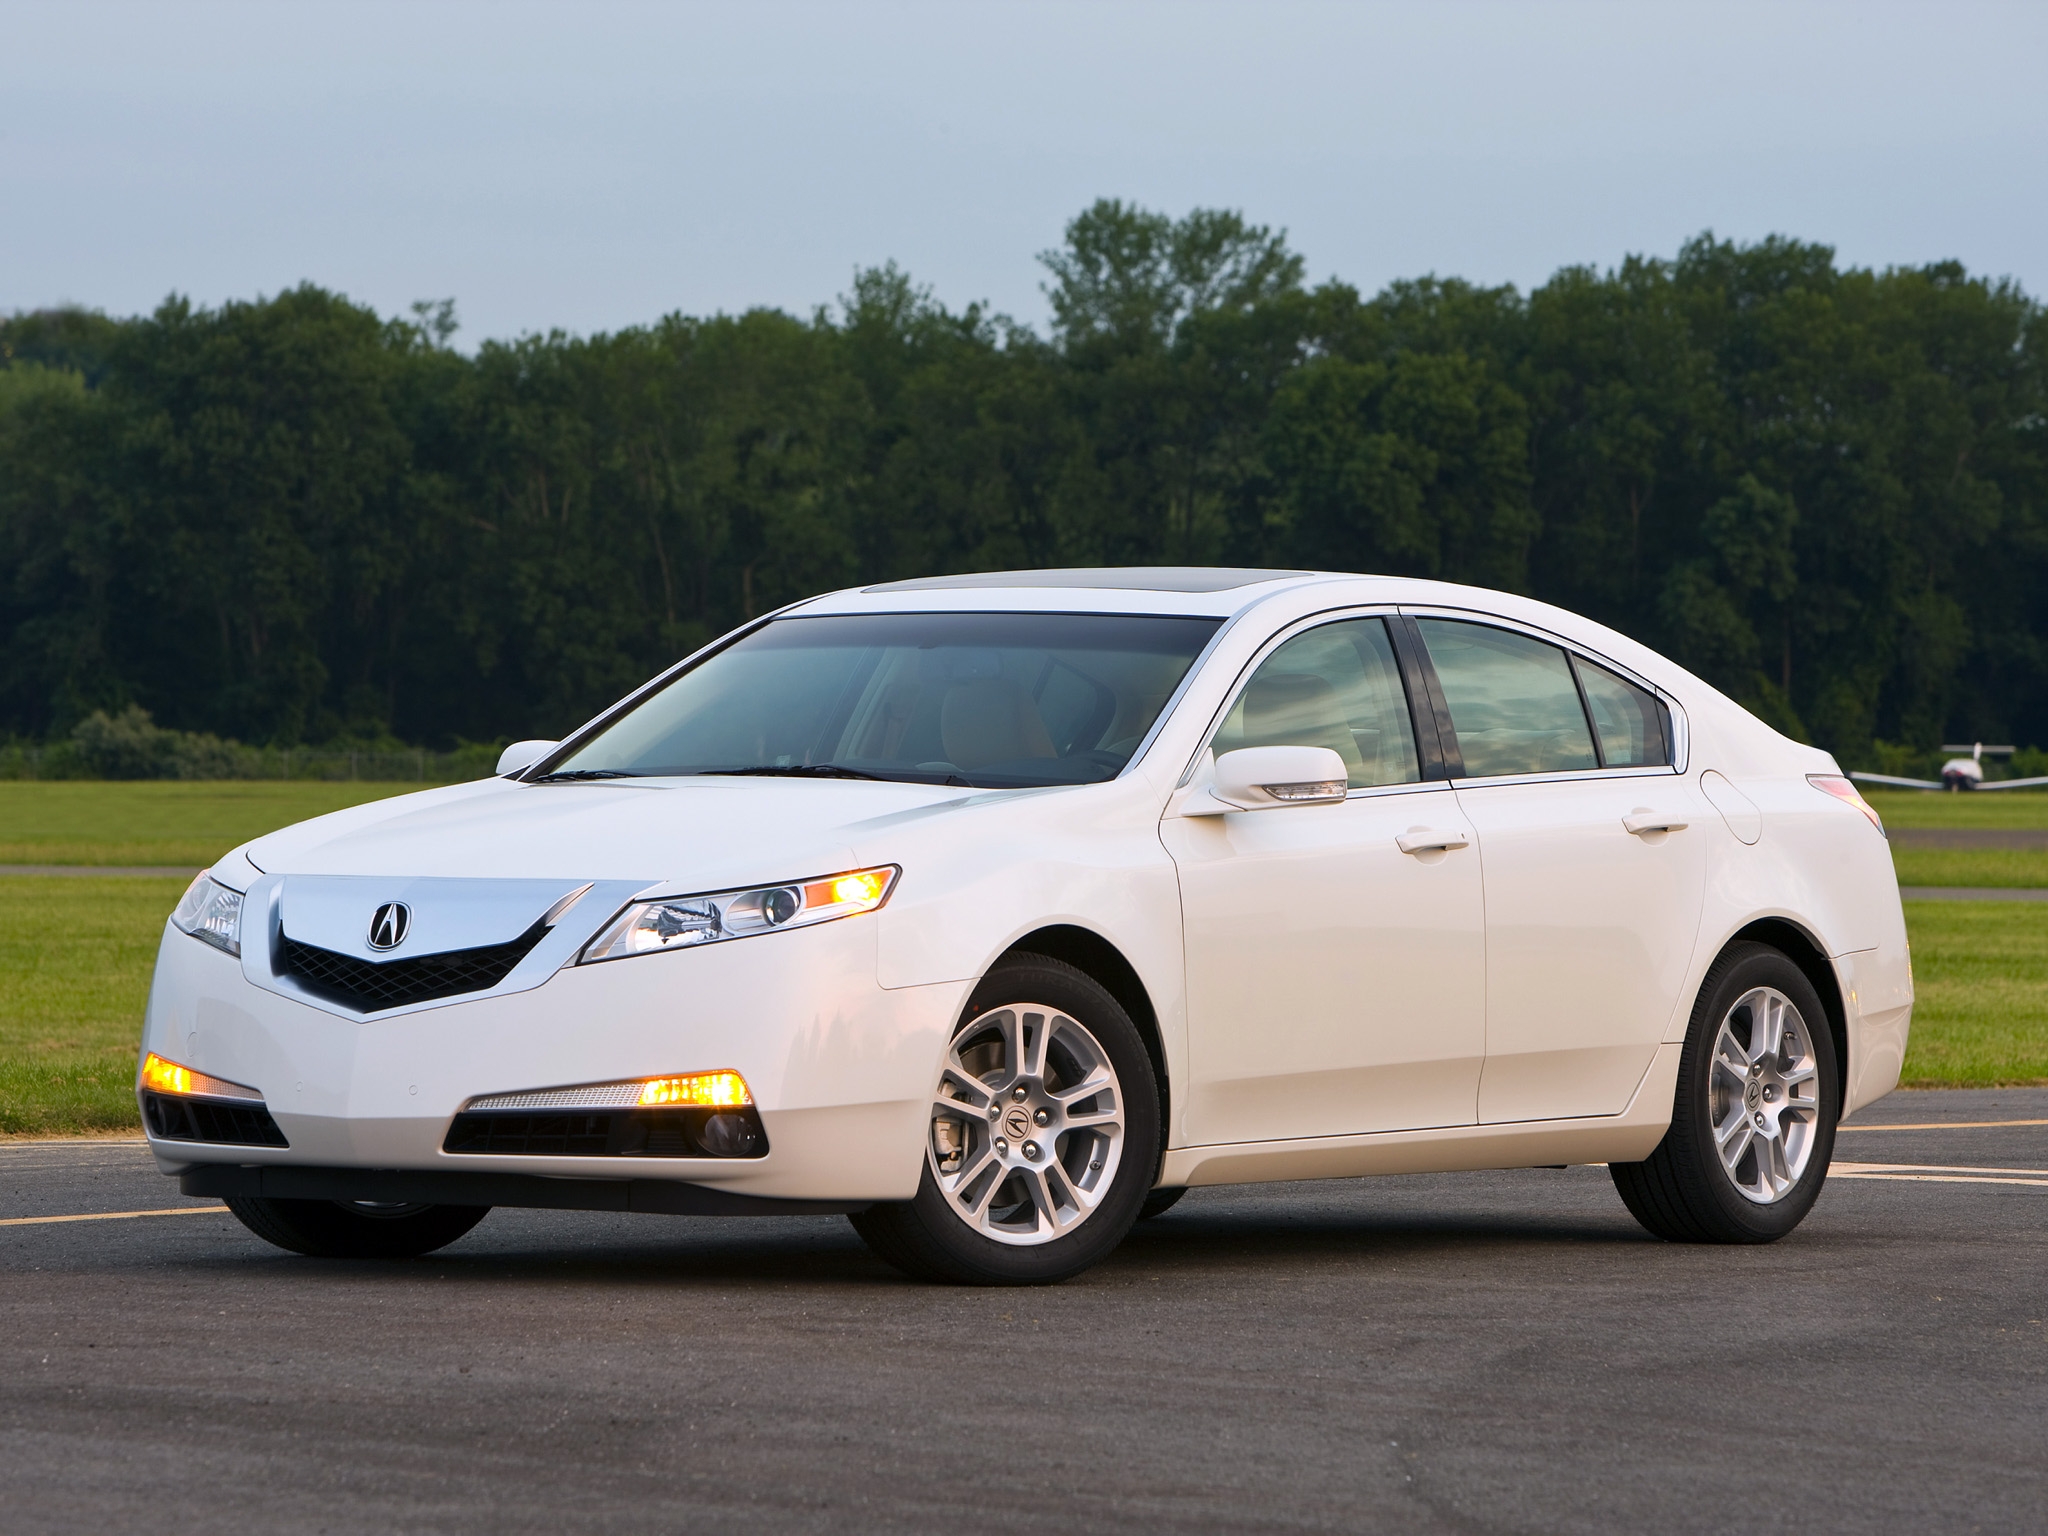 cars, auto, nature, trees, grass, acura, white, side view, style, akura, 2008, tl HD wallpaper